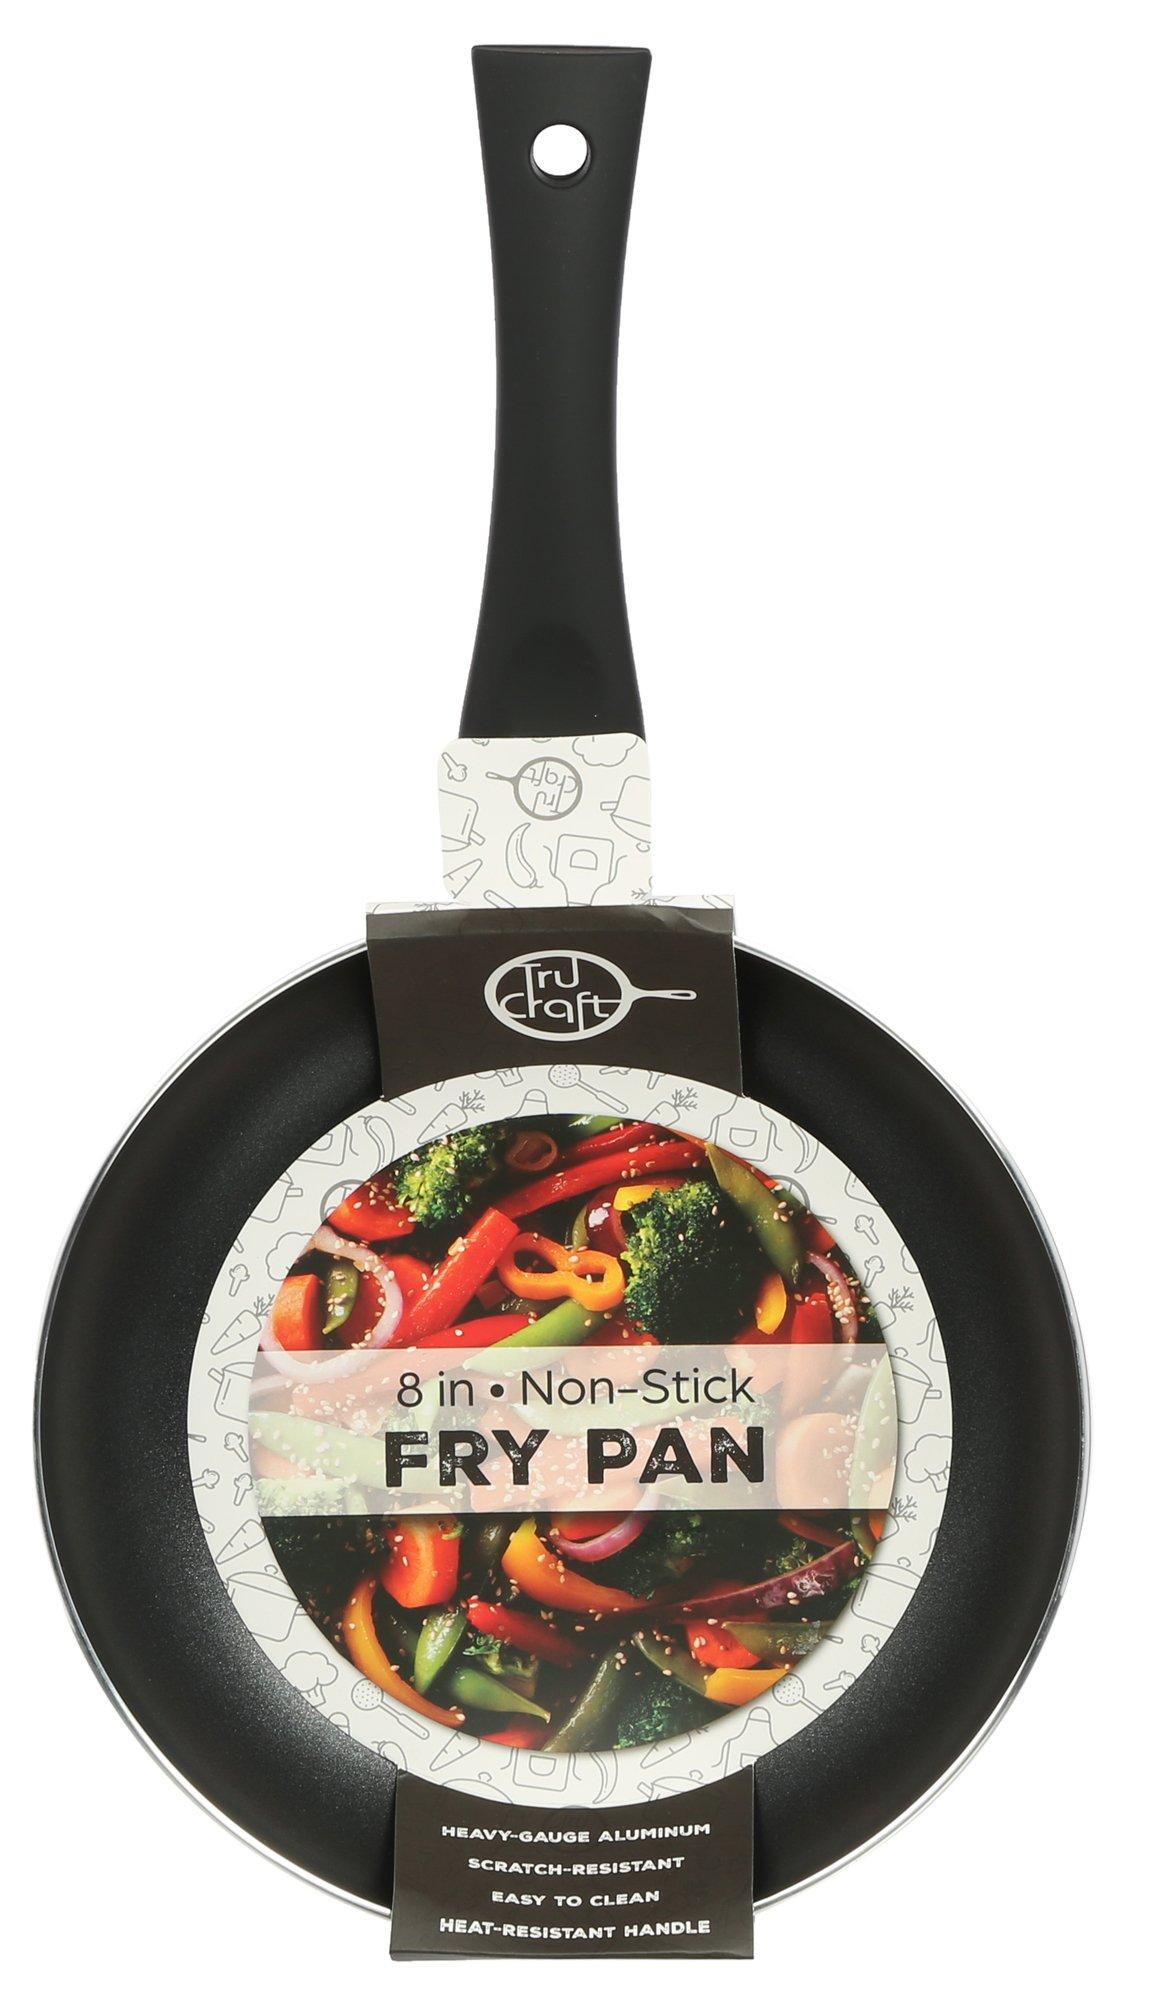 8 in. Non-Stick Fry Pan